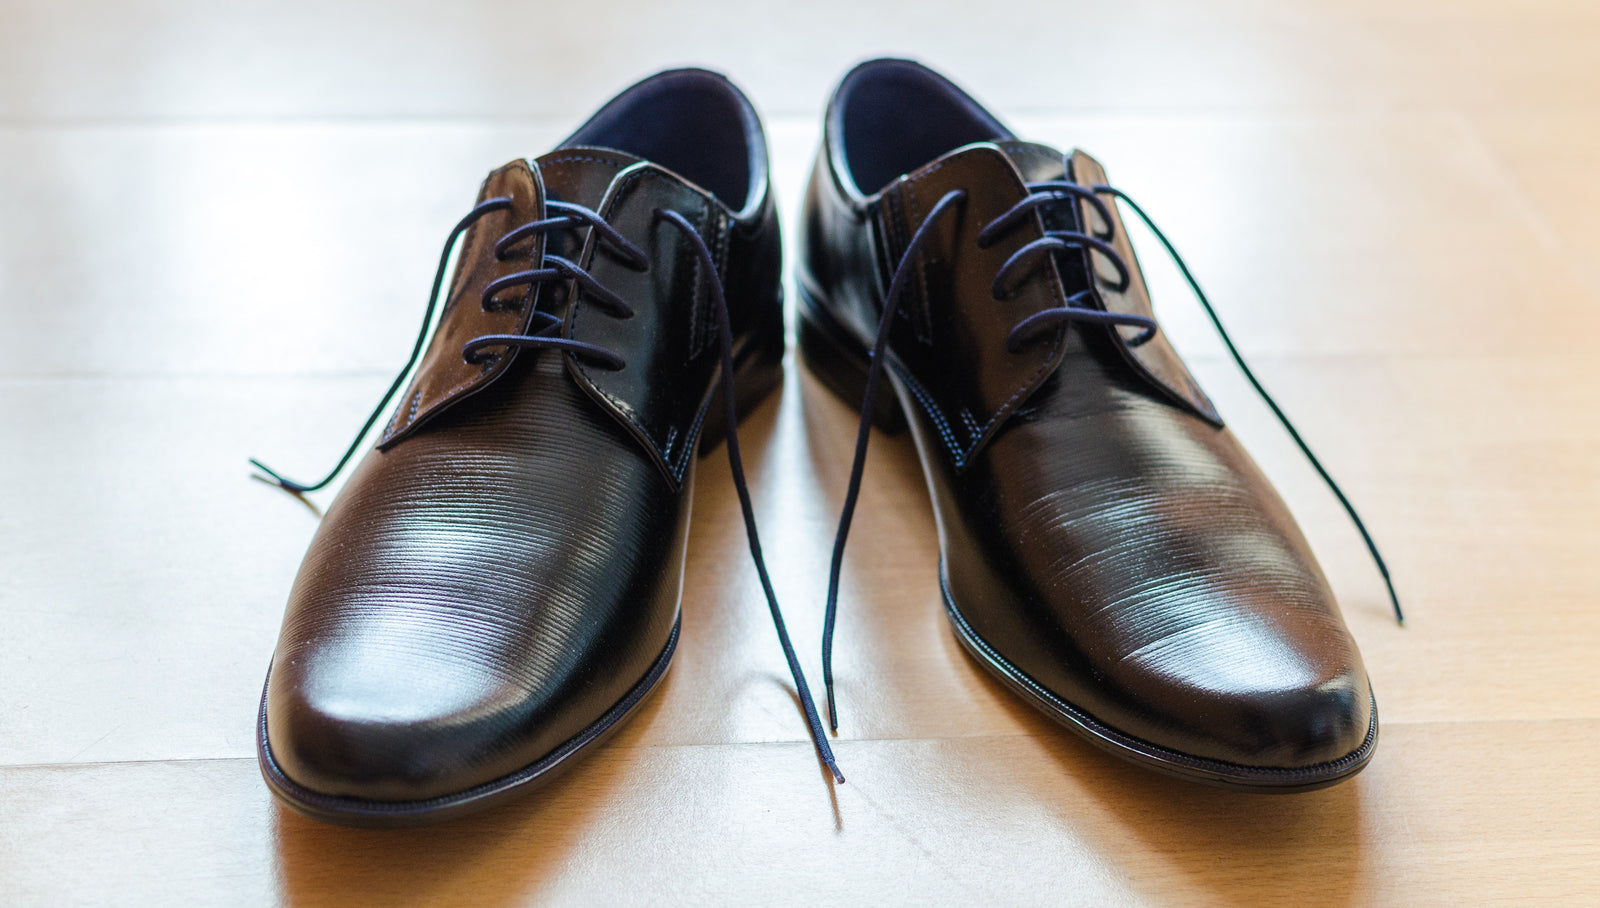 Banishing Stinky Shoes: How to Get Rid of Shoe Odor